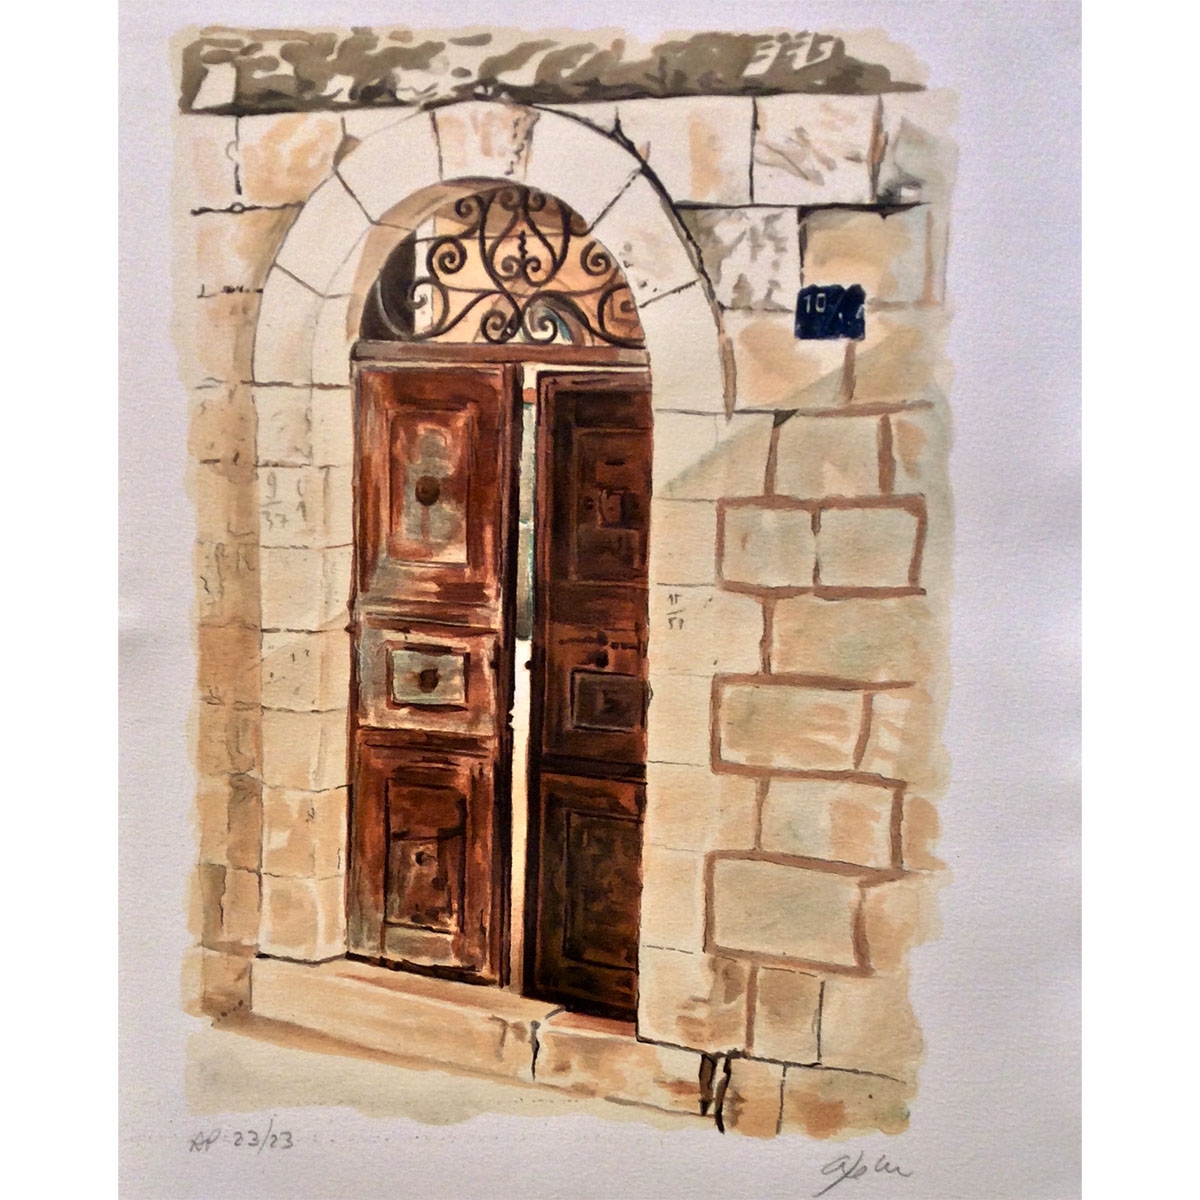 Arie Azene - Brown Door in Jerusalem (Hand Signed & Numbered Limited Edition Serigraph) - 1